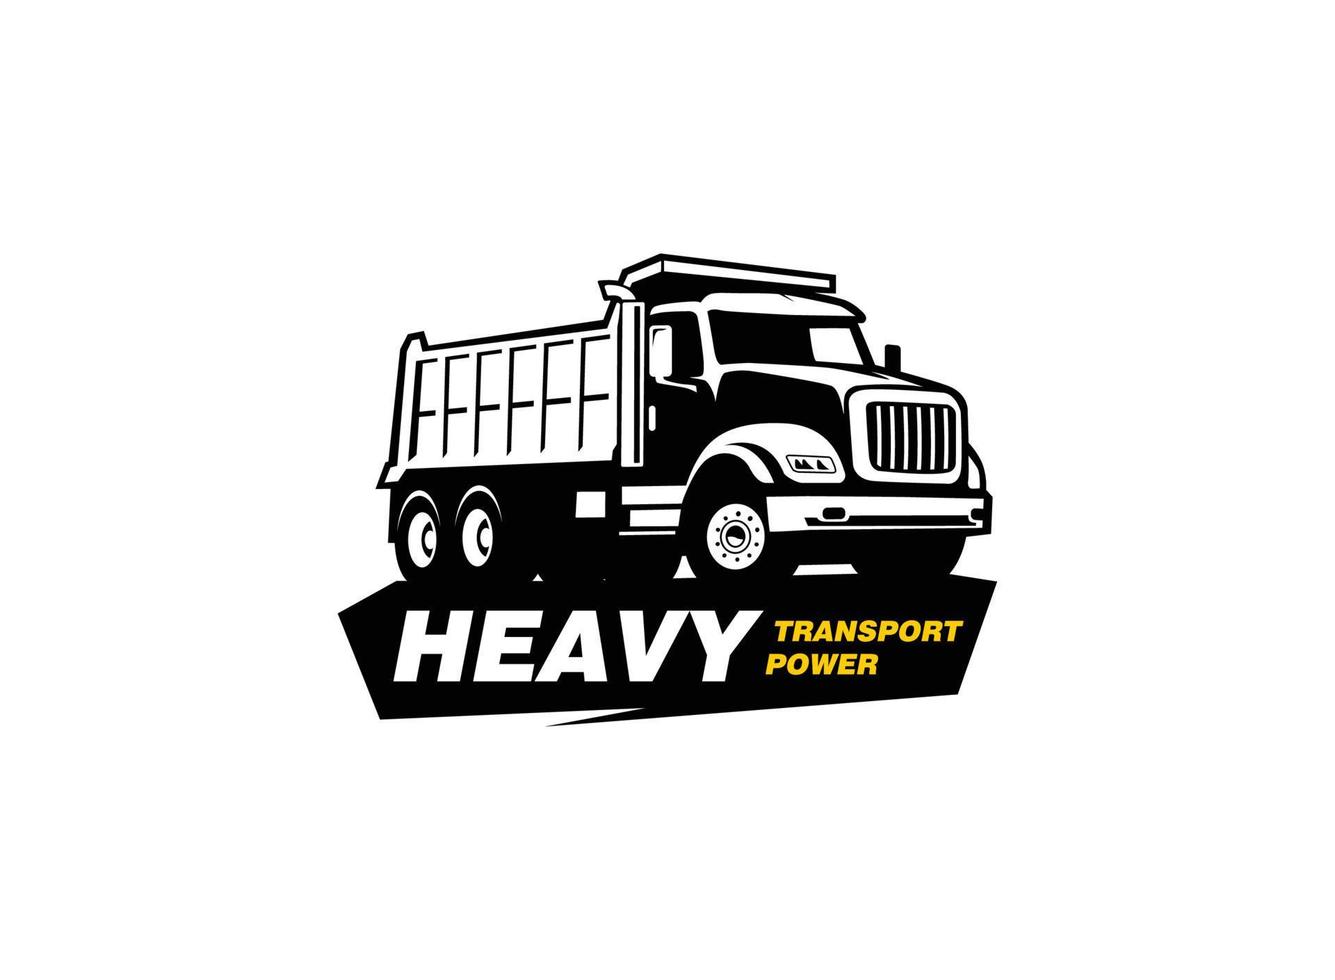 DUMP TRUCK logo vector for construction company. Heavy equipment template vector illustration for your brand.